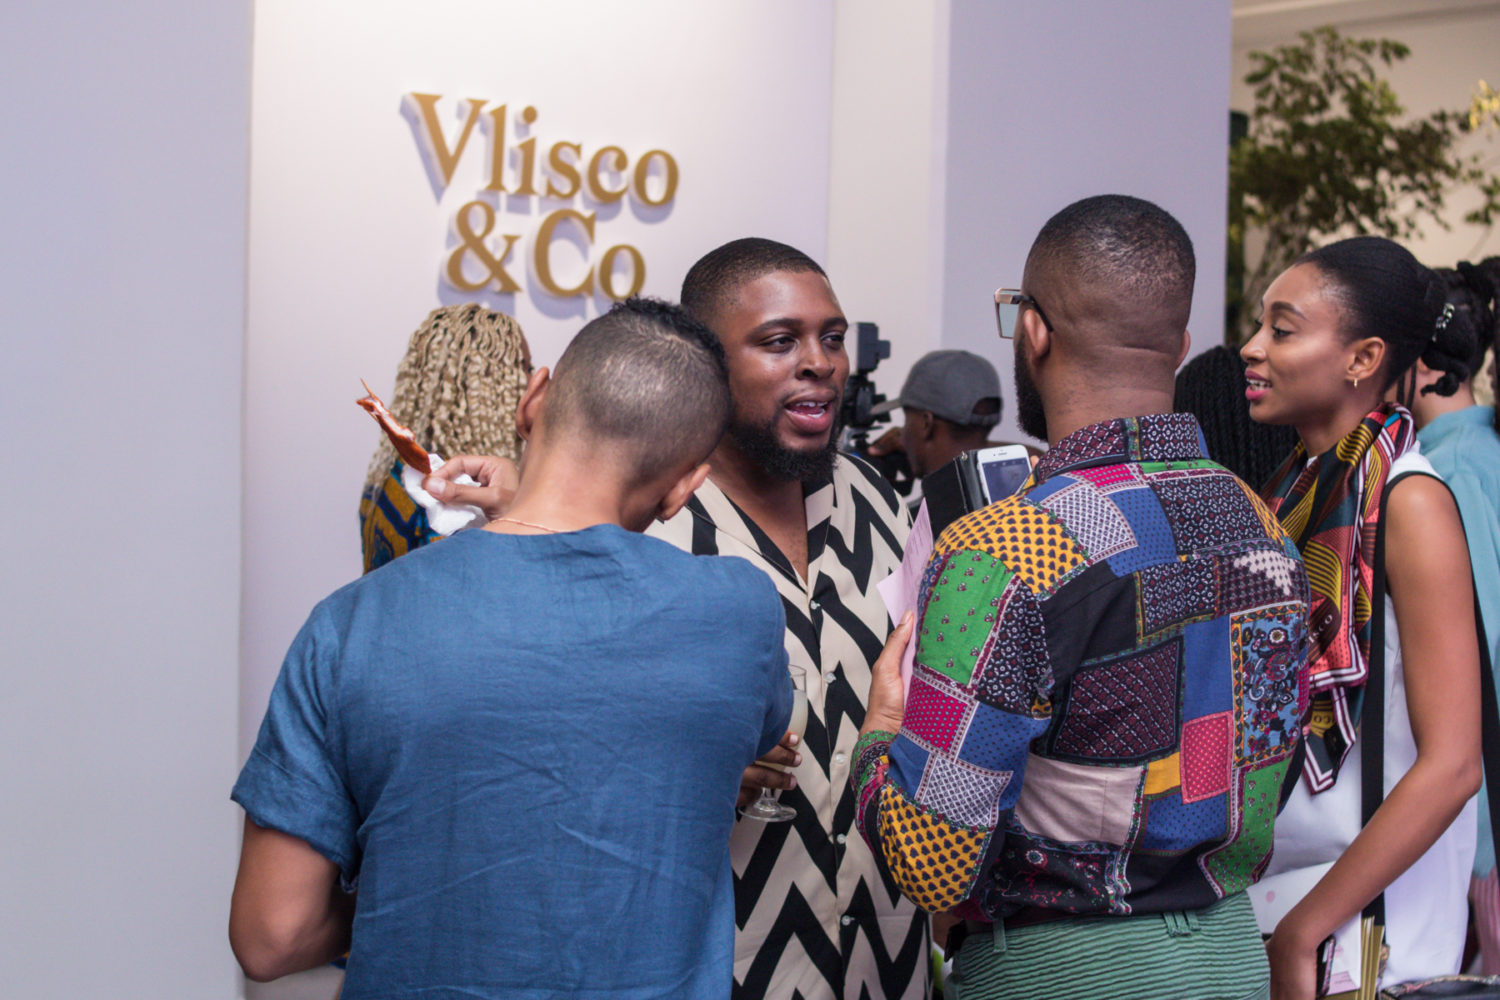 Inside The Vlisco & Co ‘Inspired by the Igbo’ Event